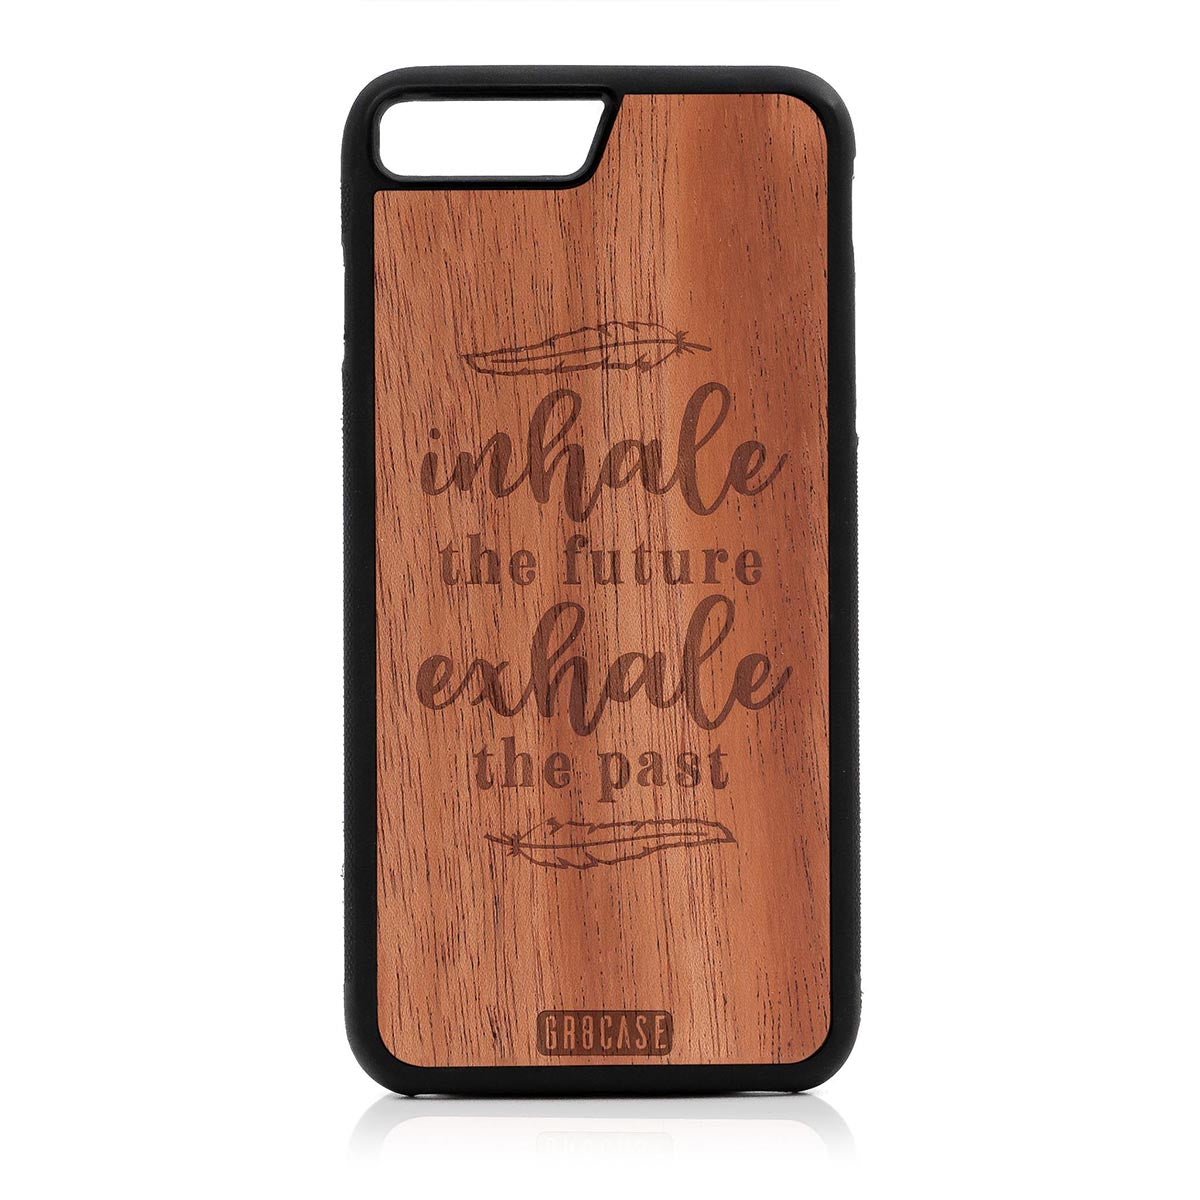 Inhale Future Exhale The Past Design Wood Case For iPhone 7 Plus / 8 Plus by GR8CASE